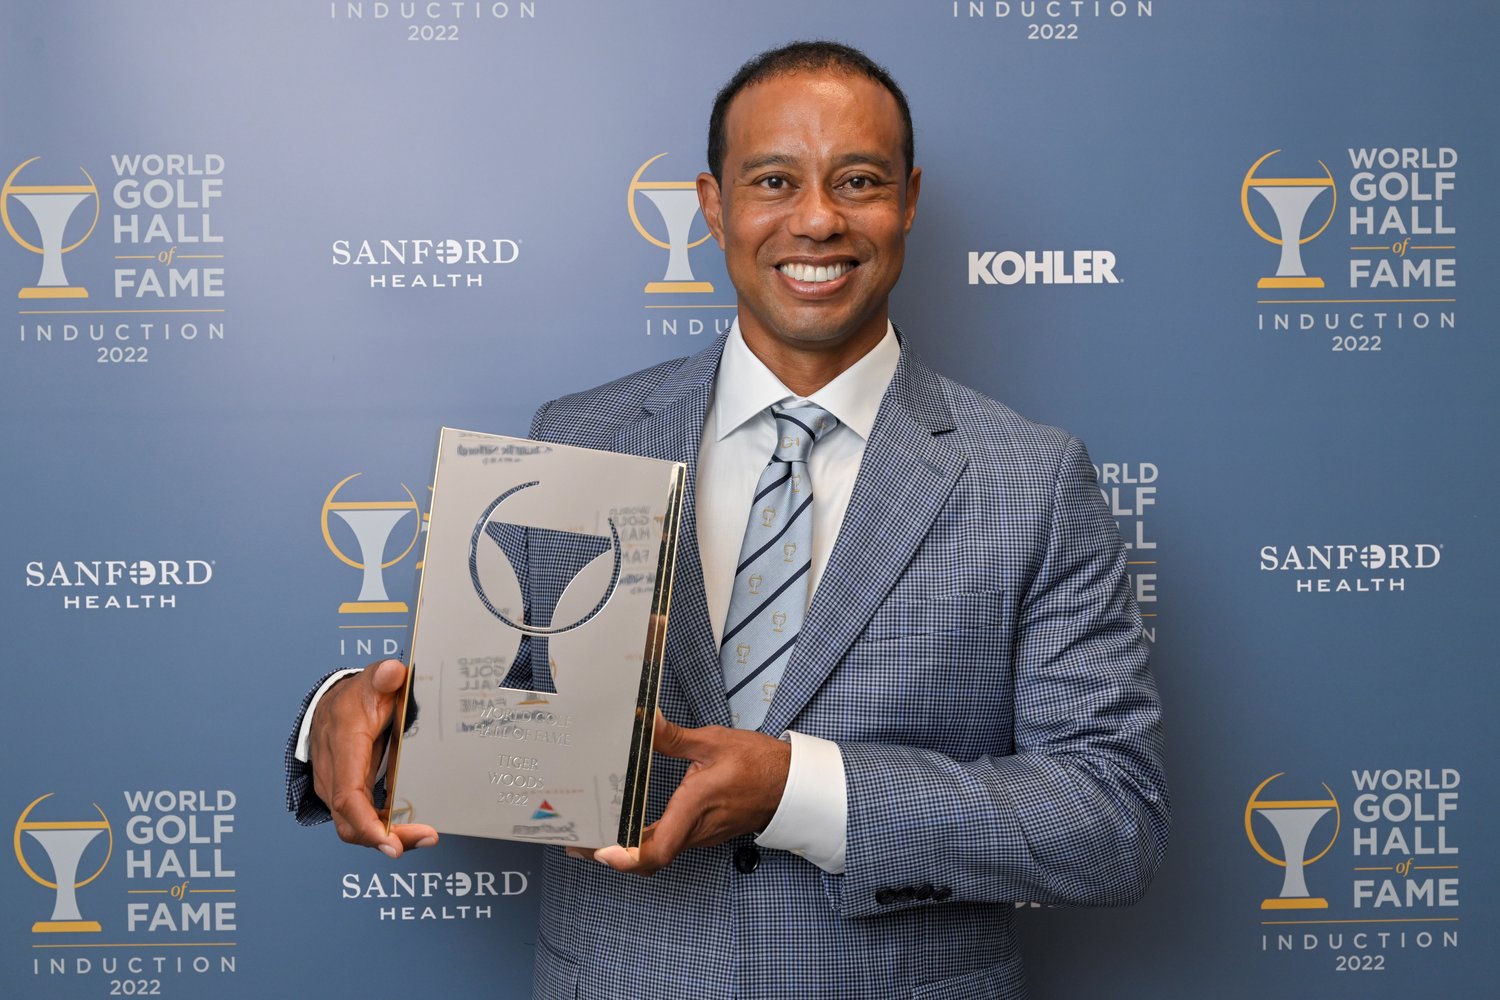 World Golf Hall of Fame inductee, Tiger Woods, poses for photos prior to the World Golf Hall of Fame Induction Ceremony prior to THE PLAYERS Championship at PGA TOUR Global Home in  Ponte Vedra Beach.